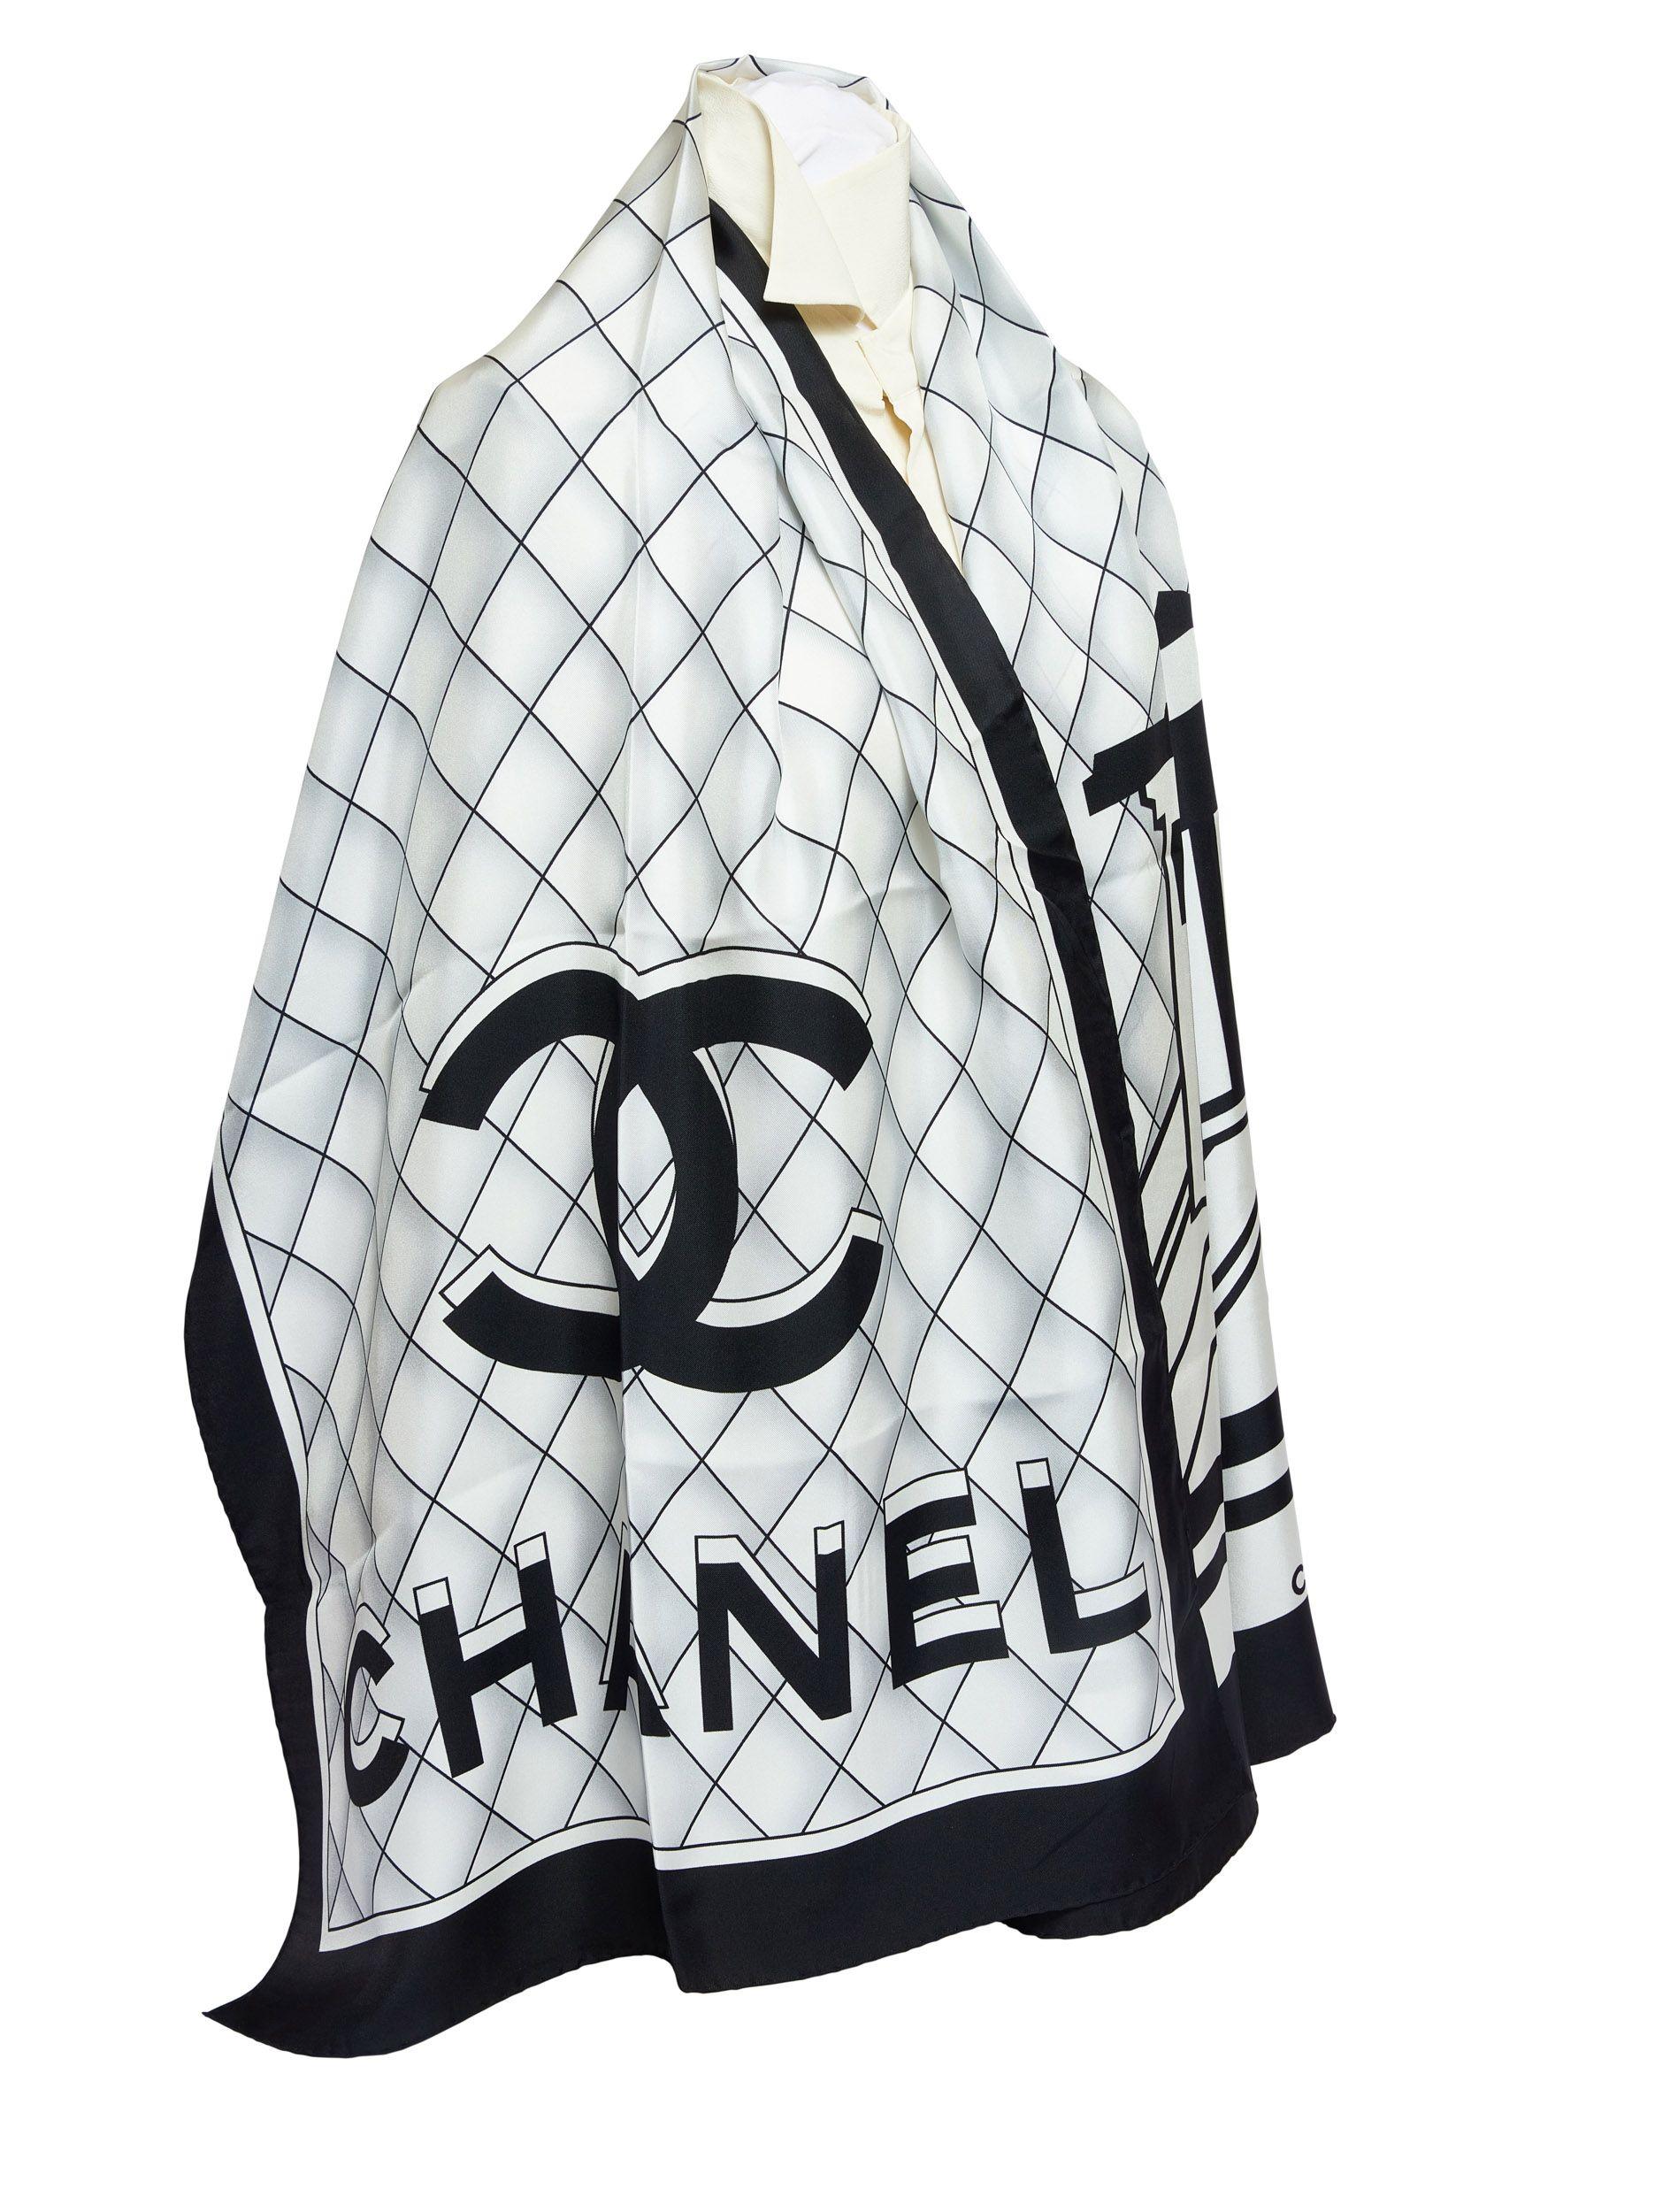 Chanel black and white silk scarf. On the scarf are the Chanel letters printed in 3D. The trim is black and has rolled edges. It is brand new.
